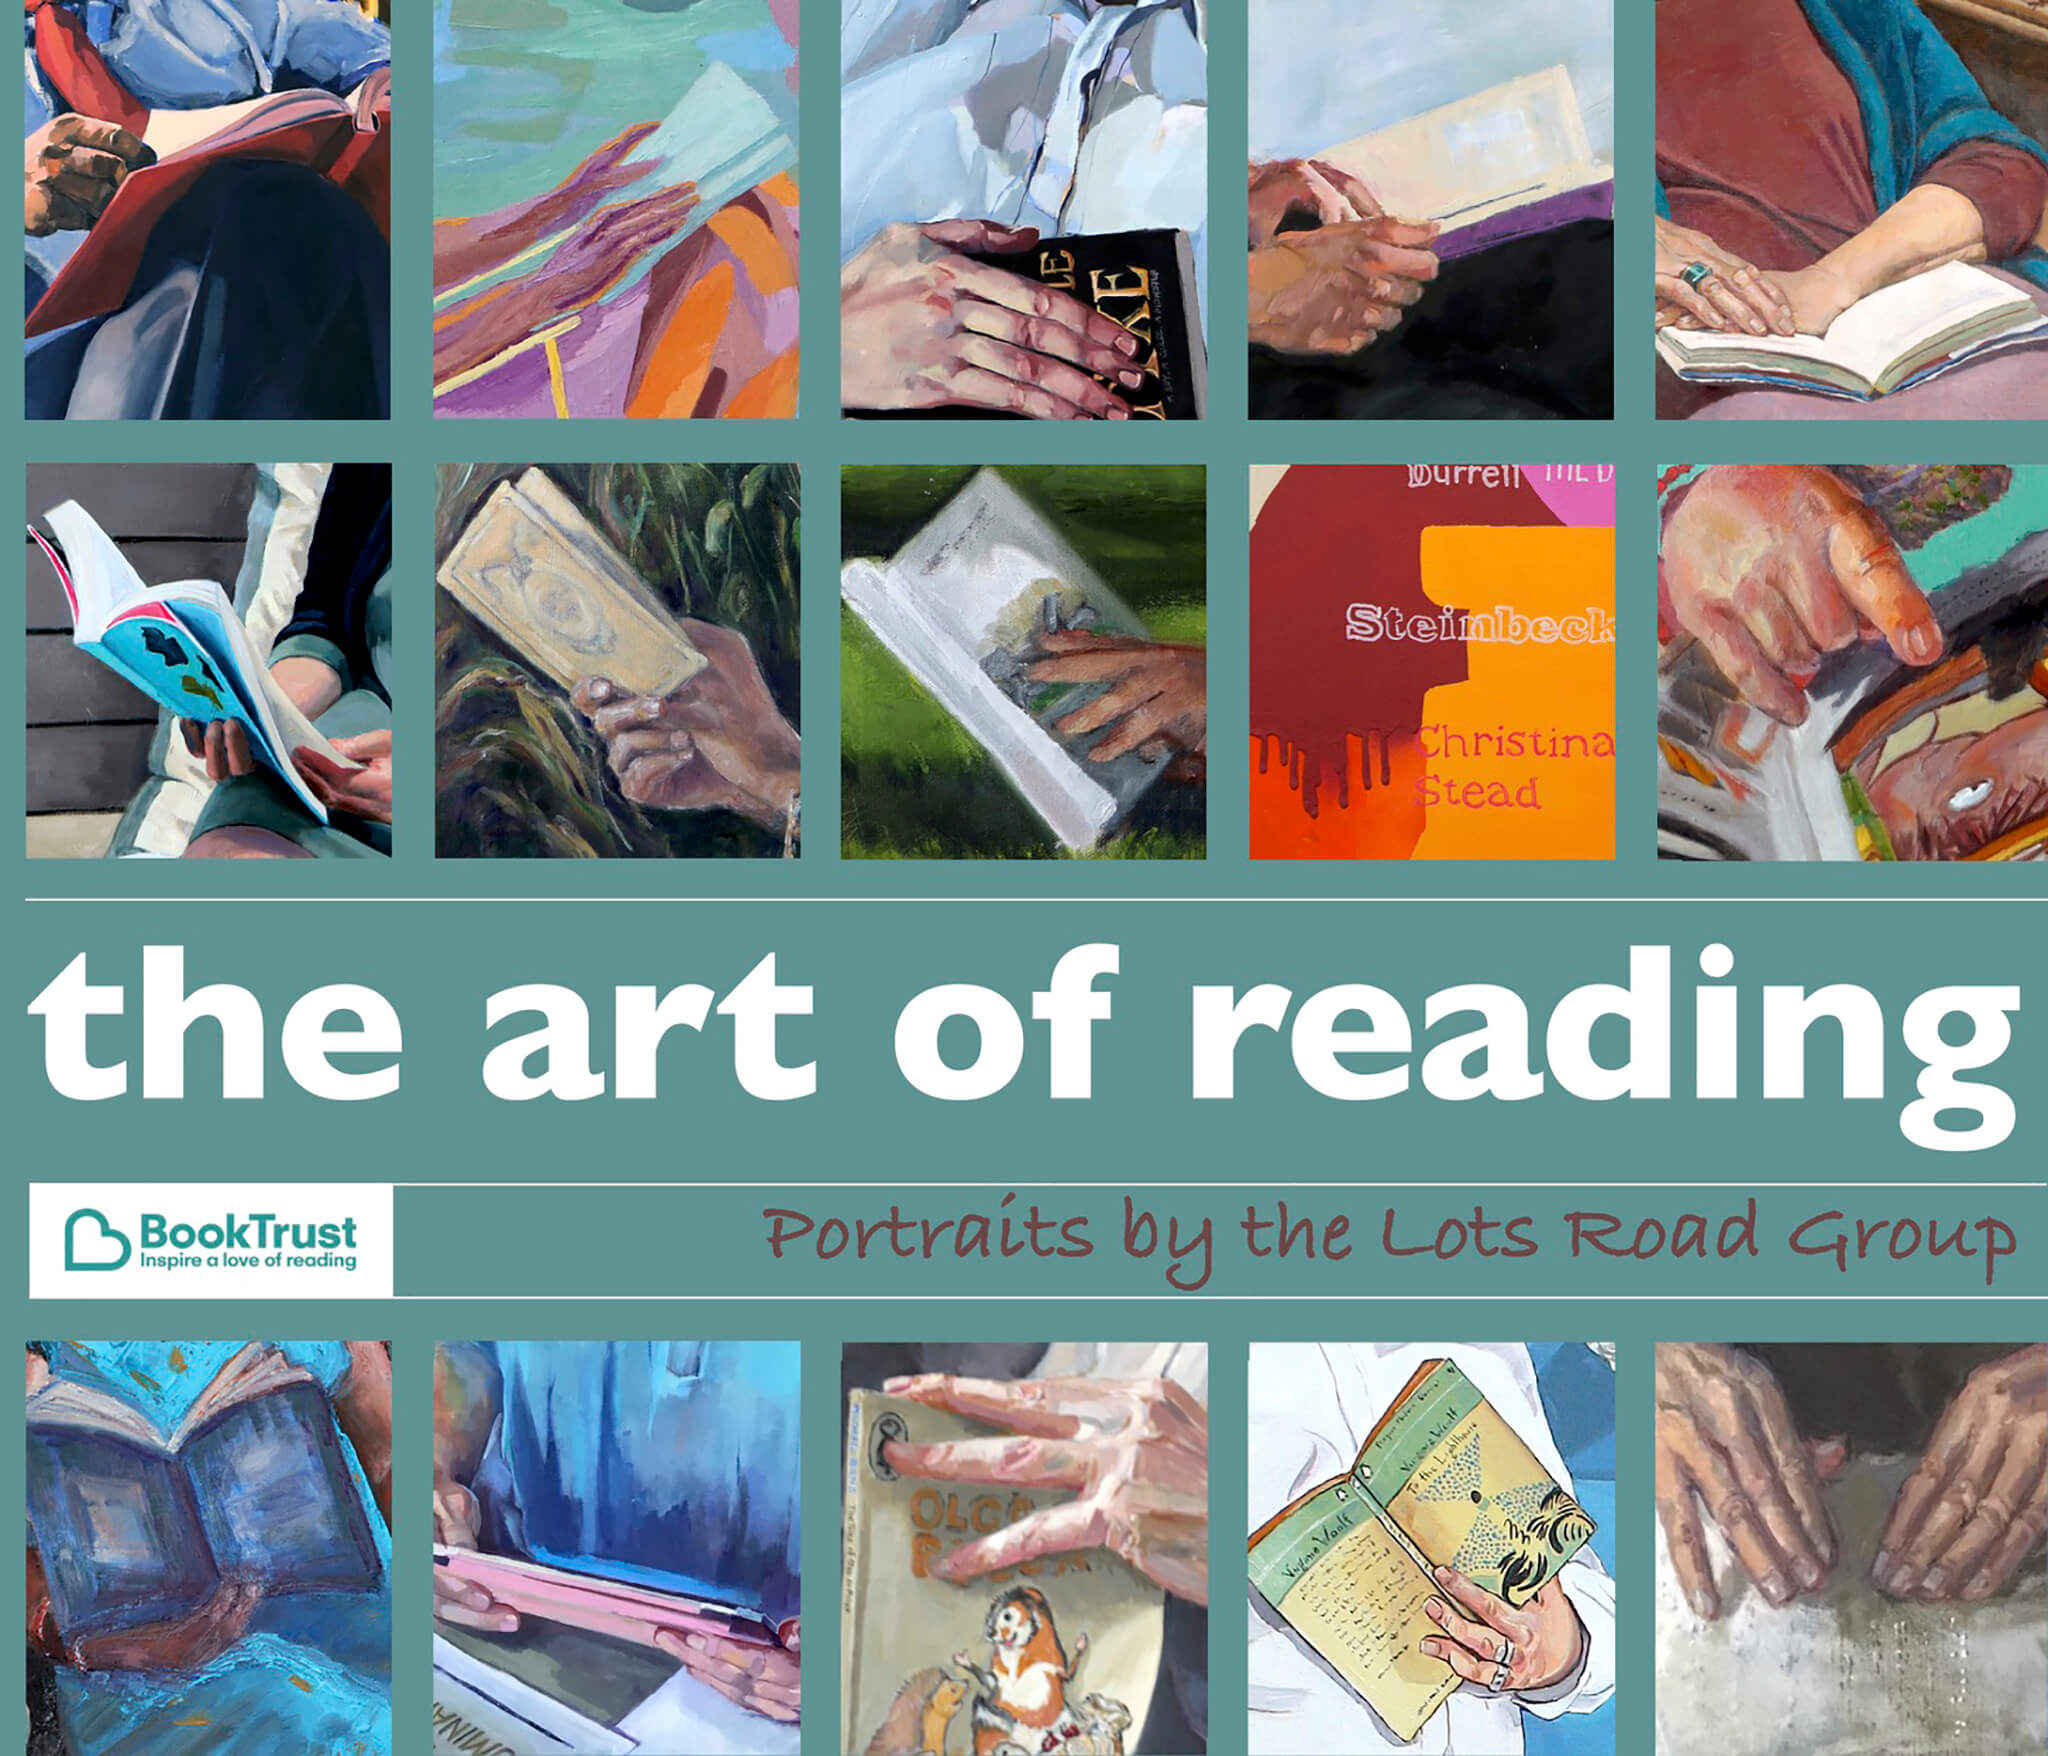 The Lots Road Group The Art of Reading exhibition catalogue cover.